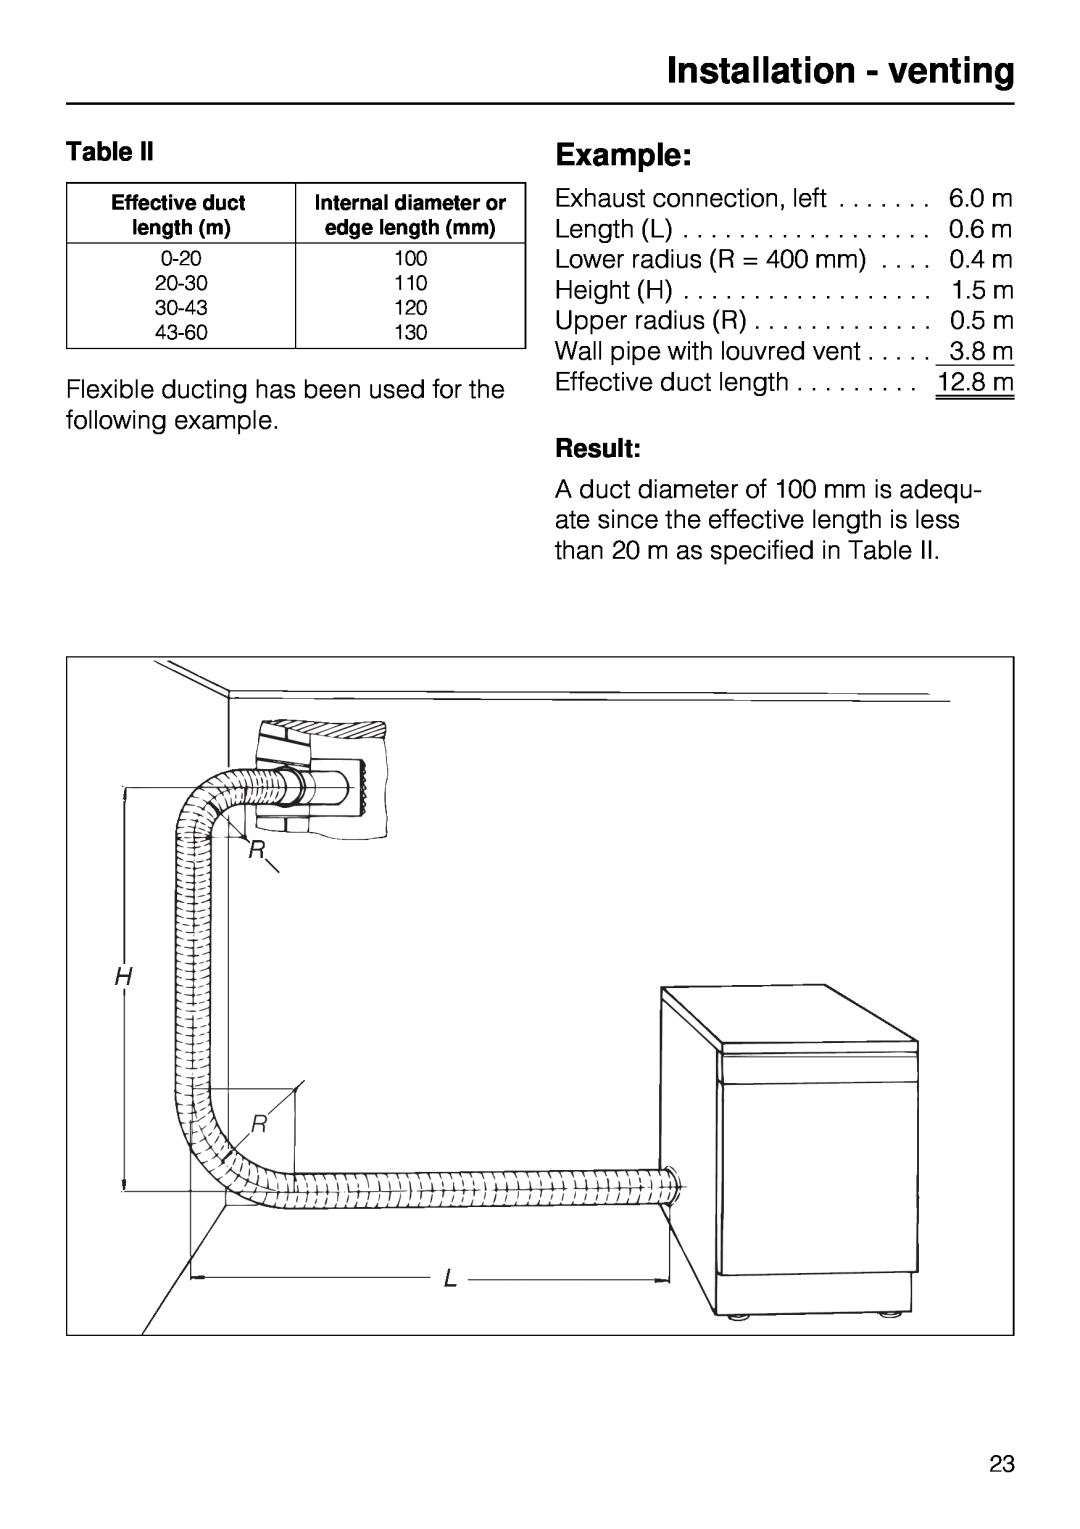 Miele T 1515 operating instructions Example, Result, Installation - venting 